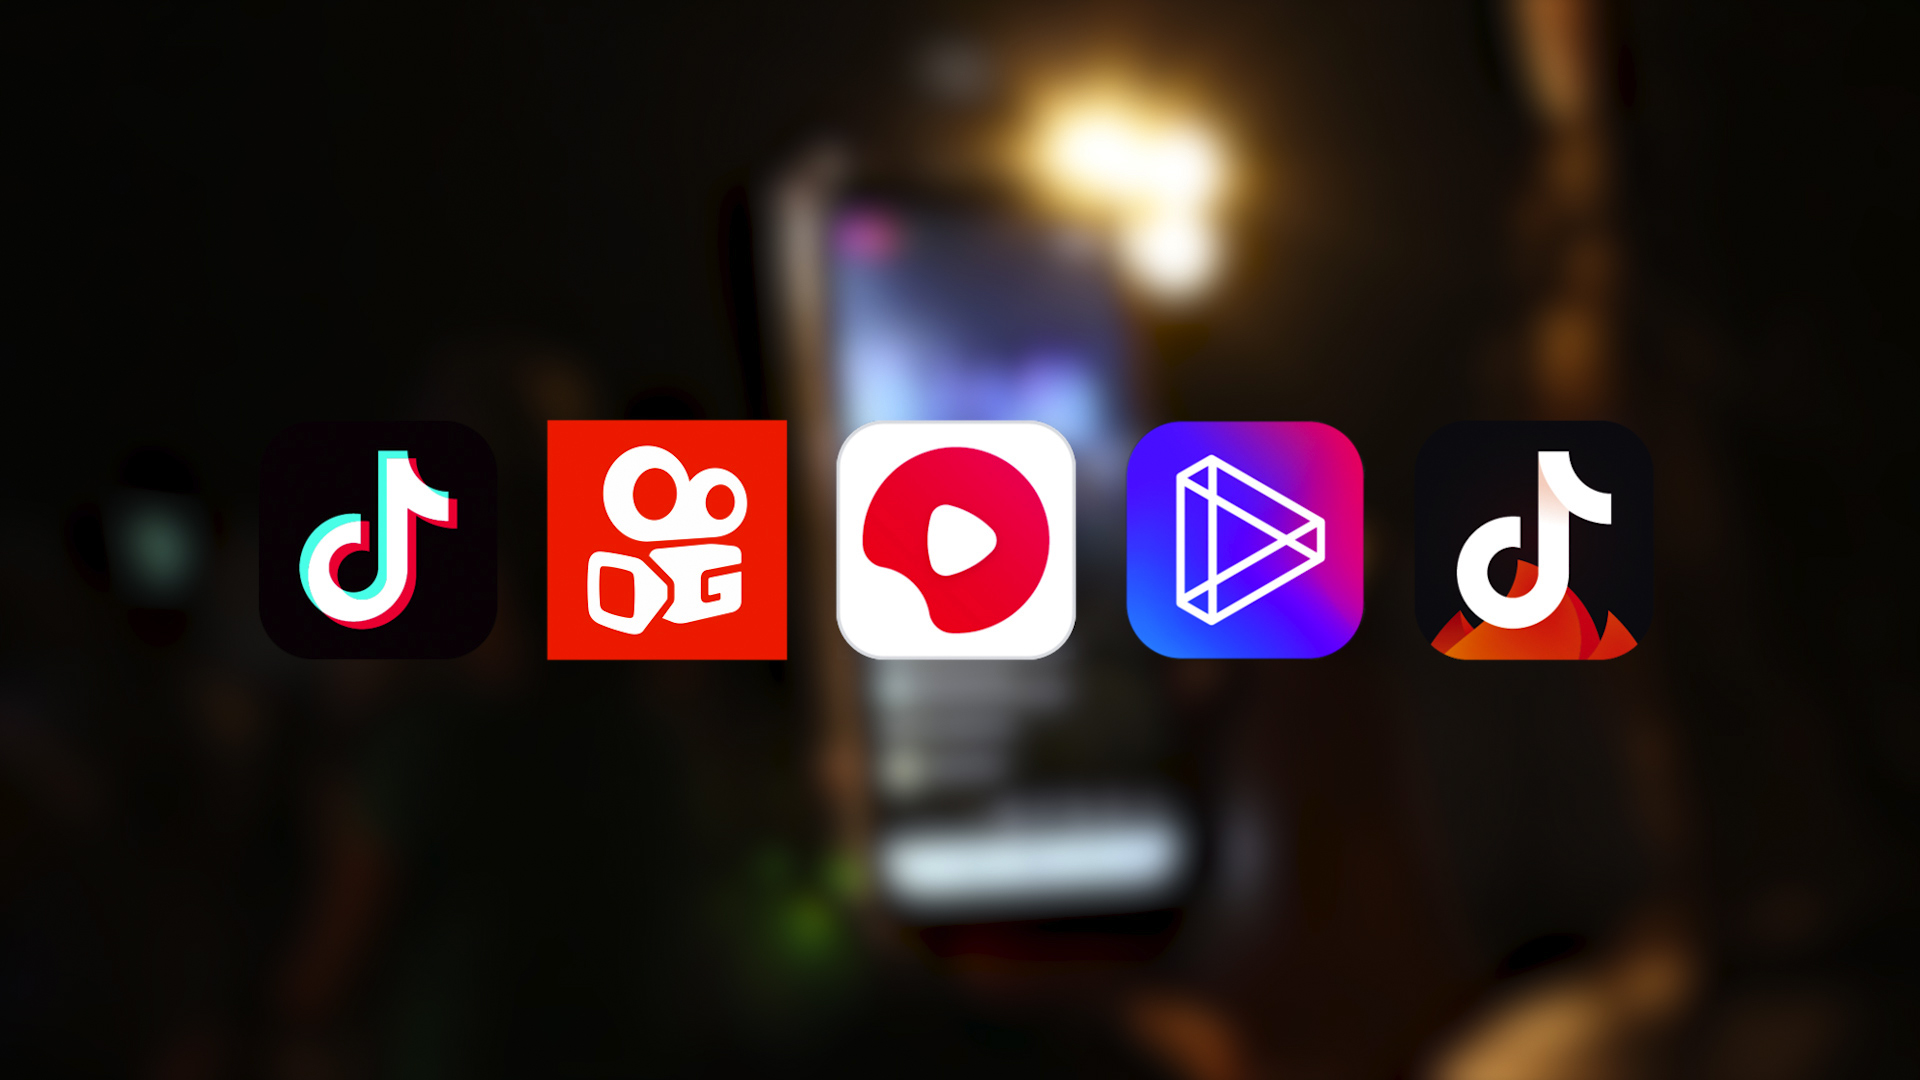 Video | These are Chinese netizens’ favorite short-video apps in 2020